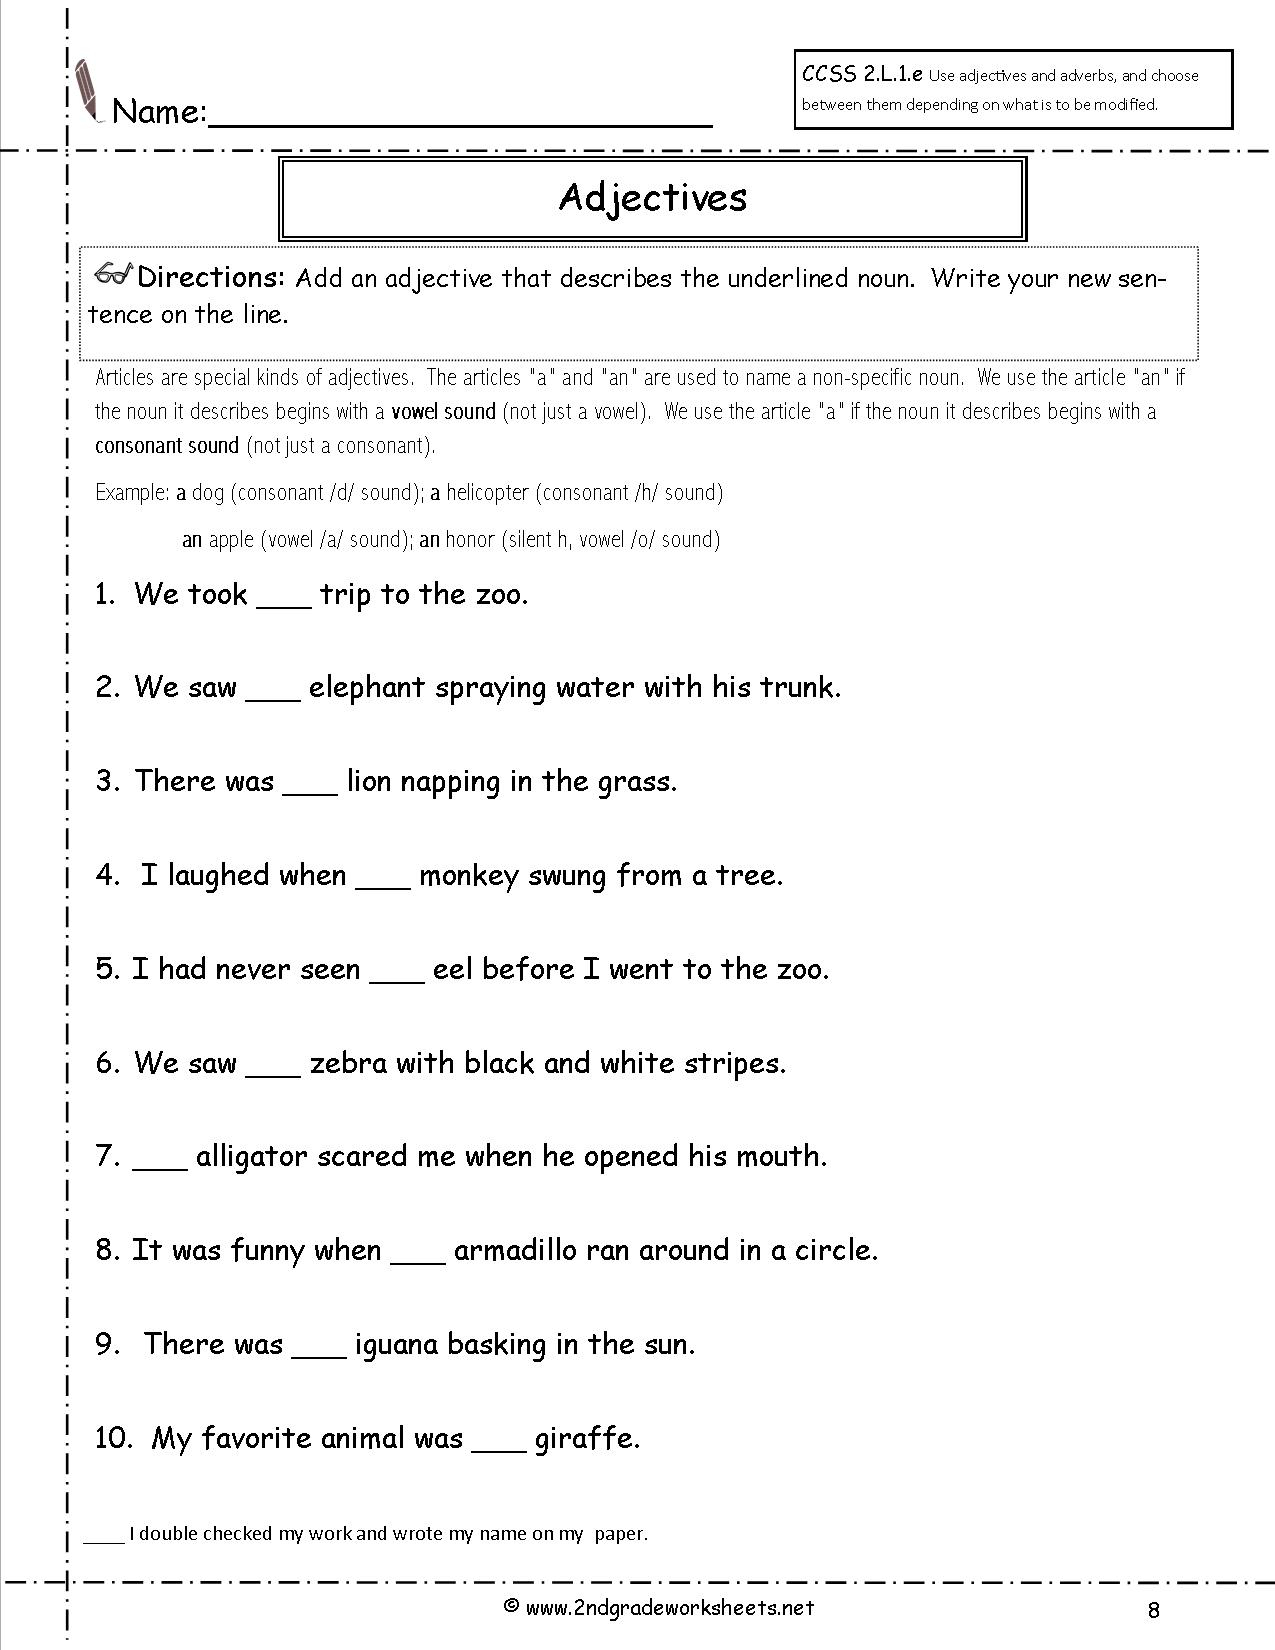 Printable This These Worksheets In 2020 English Grammar Worksheets Images